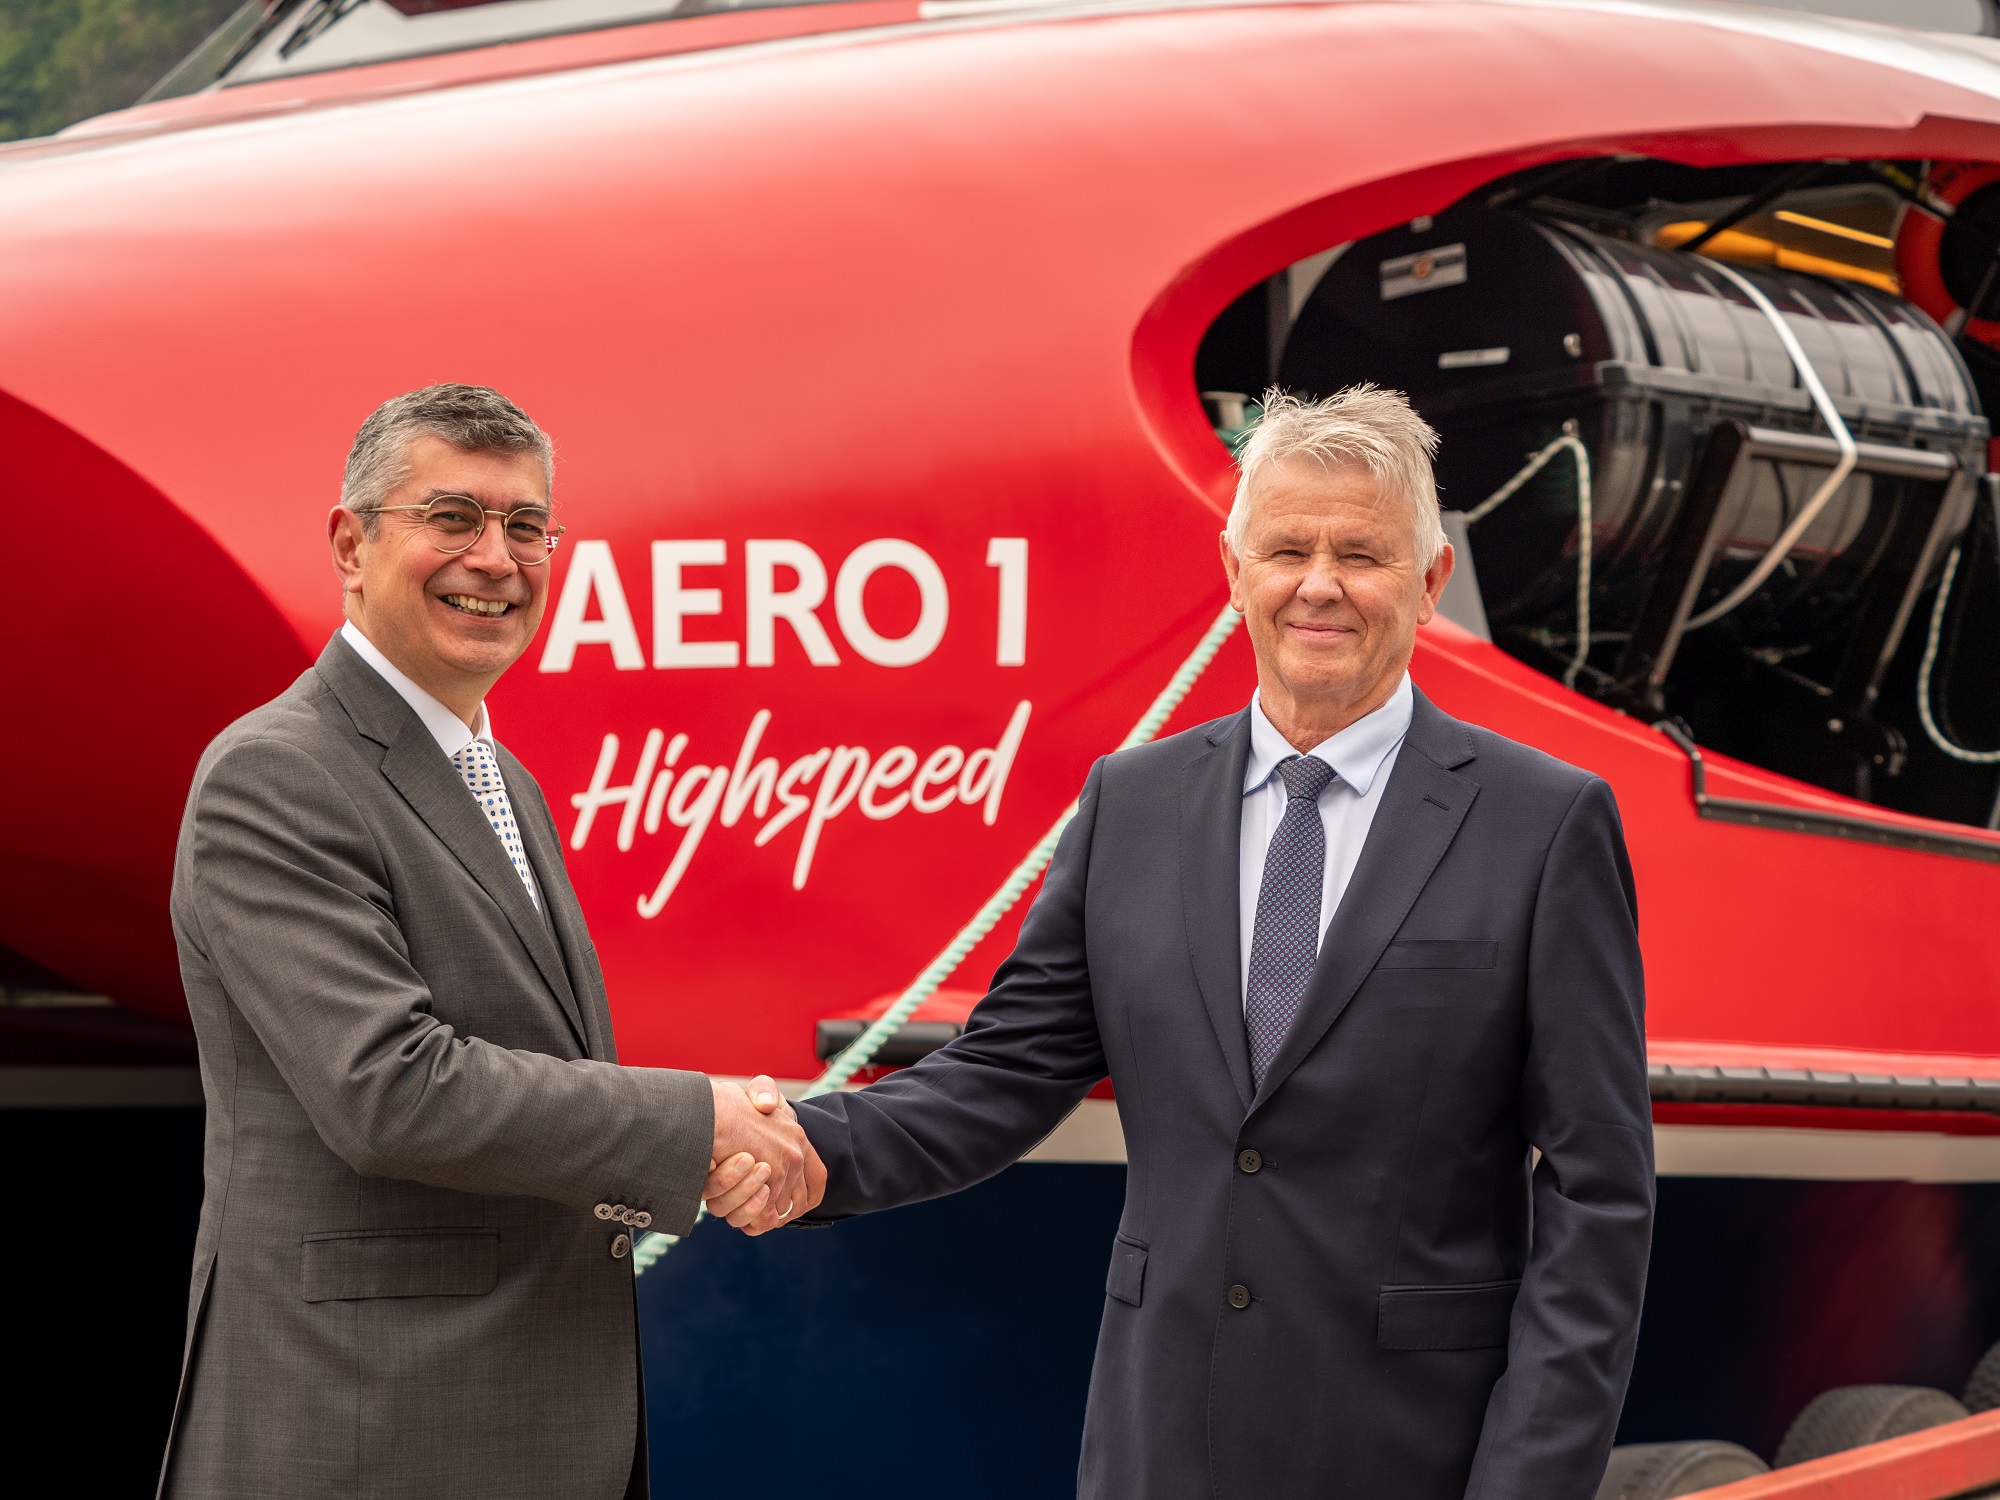 Delivery of Aero 1 Highspeed